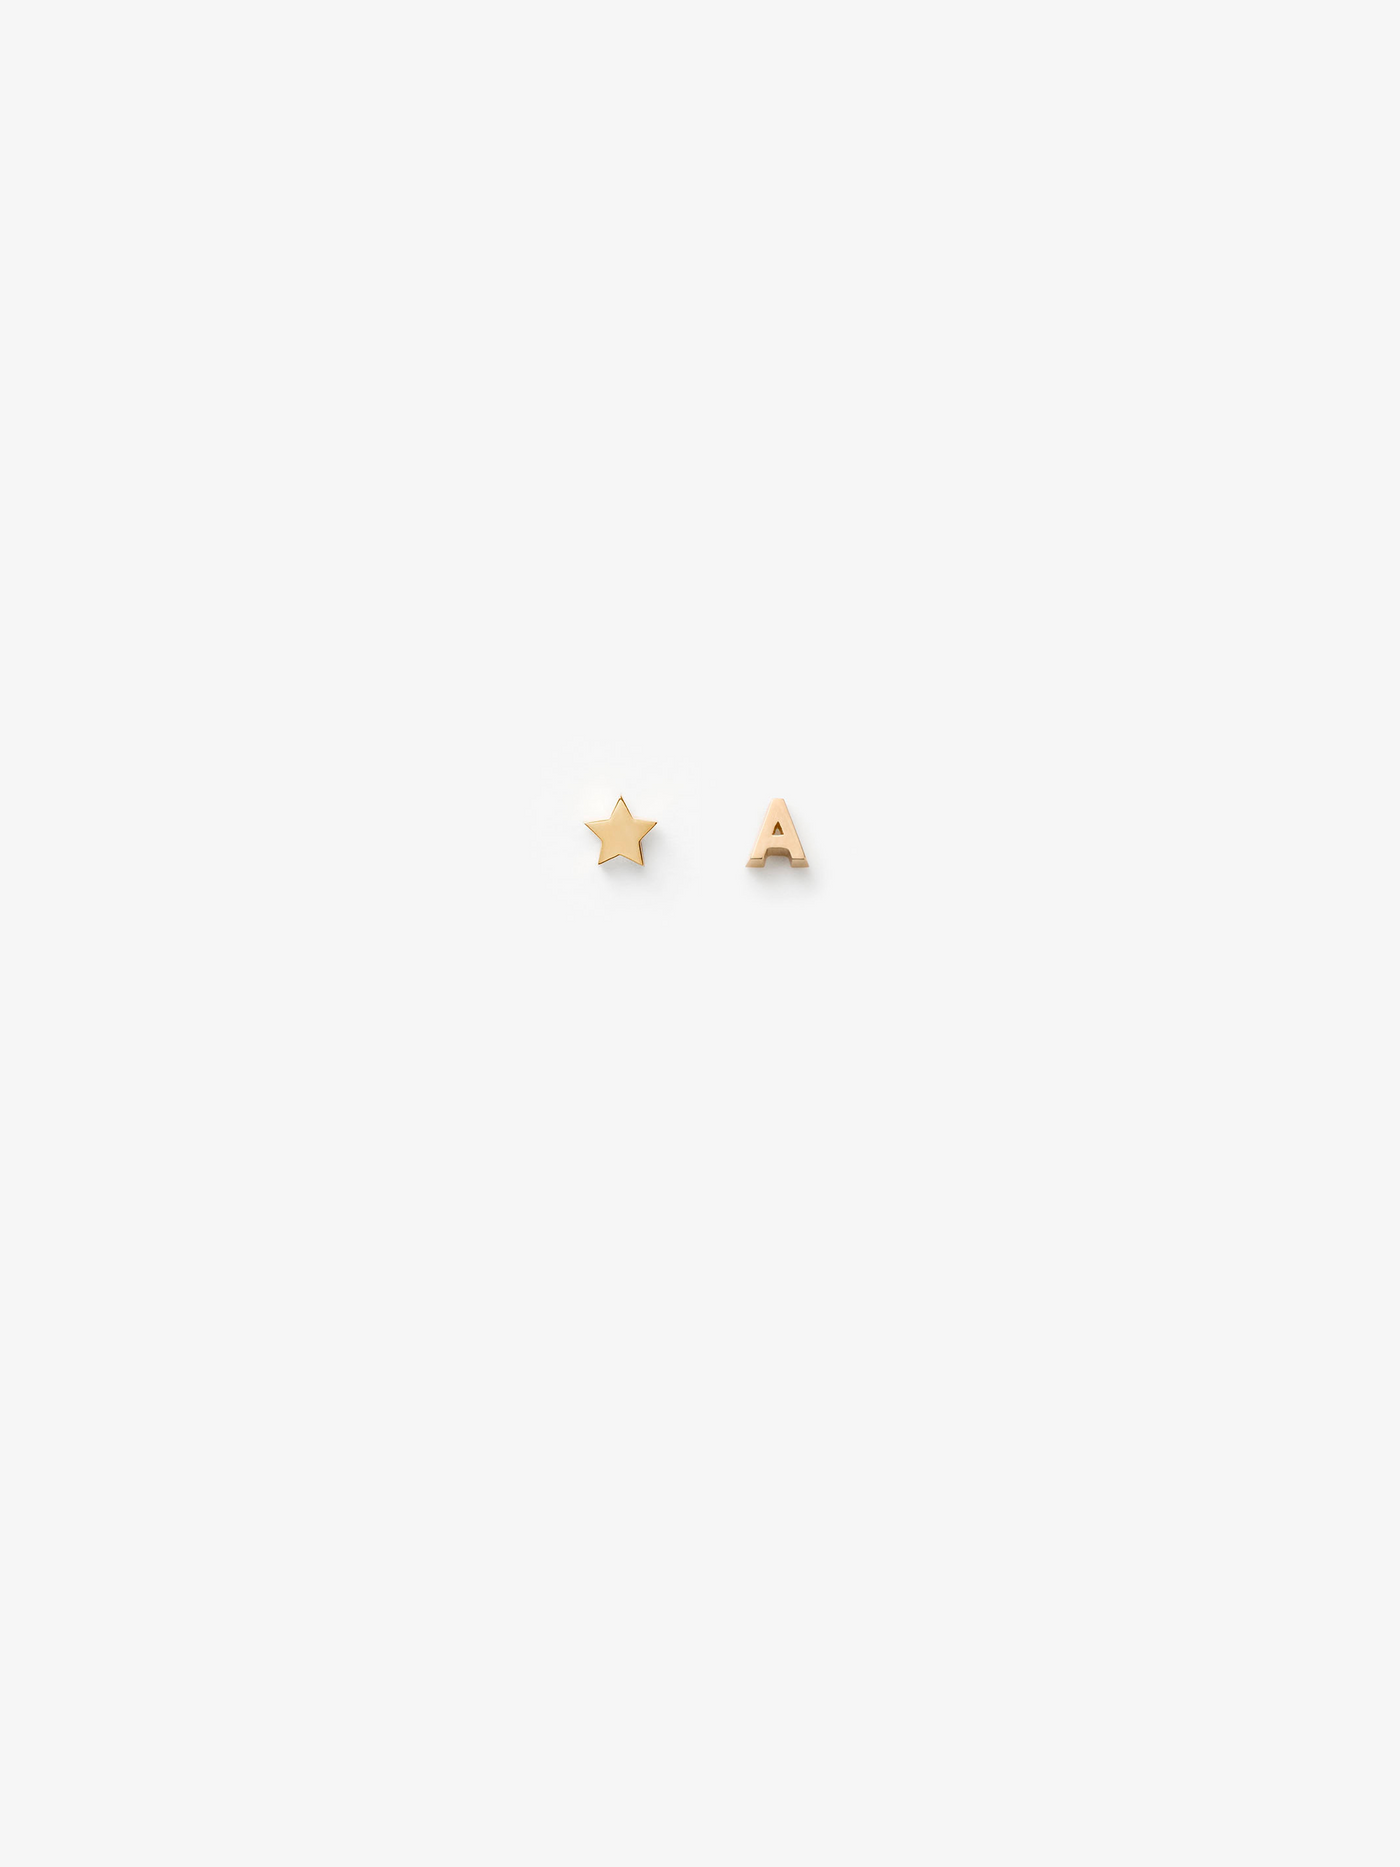 One Star and Letter Stud Earrings in 18k Gold